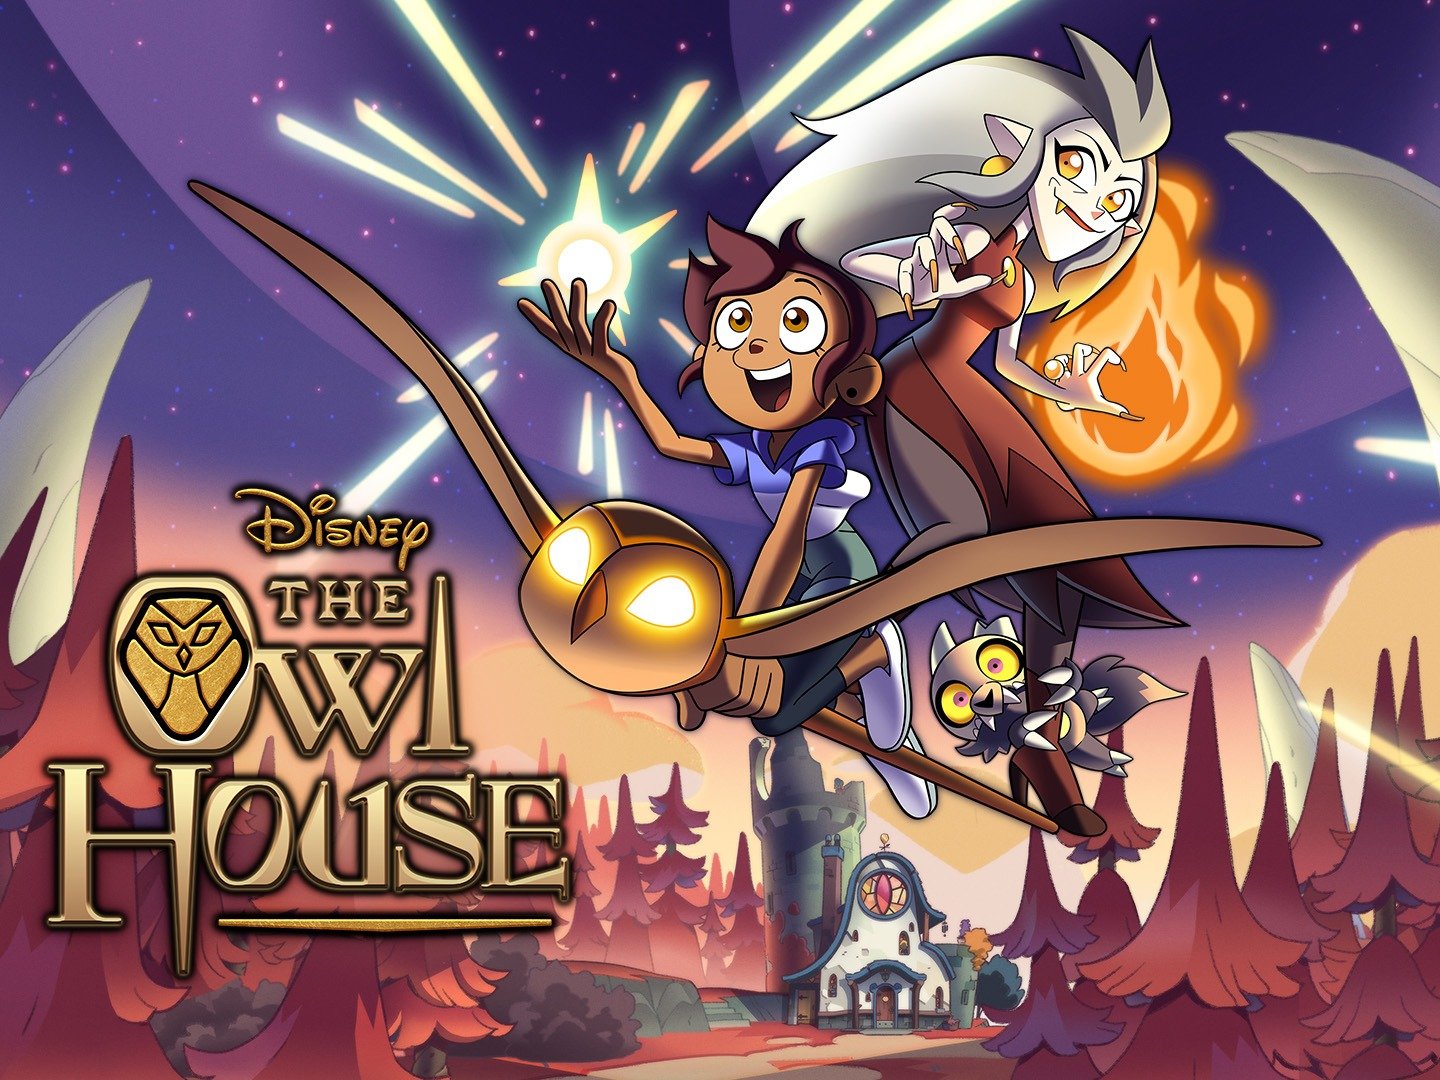 The Owl House” manages to finish strong despite cancellation – The Talisman